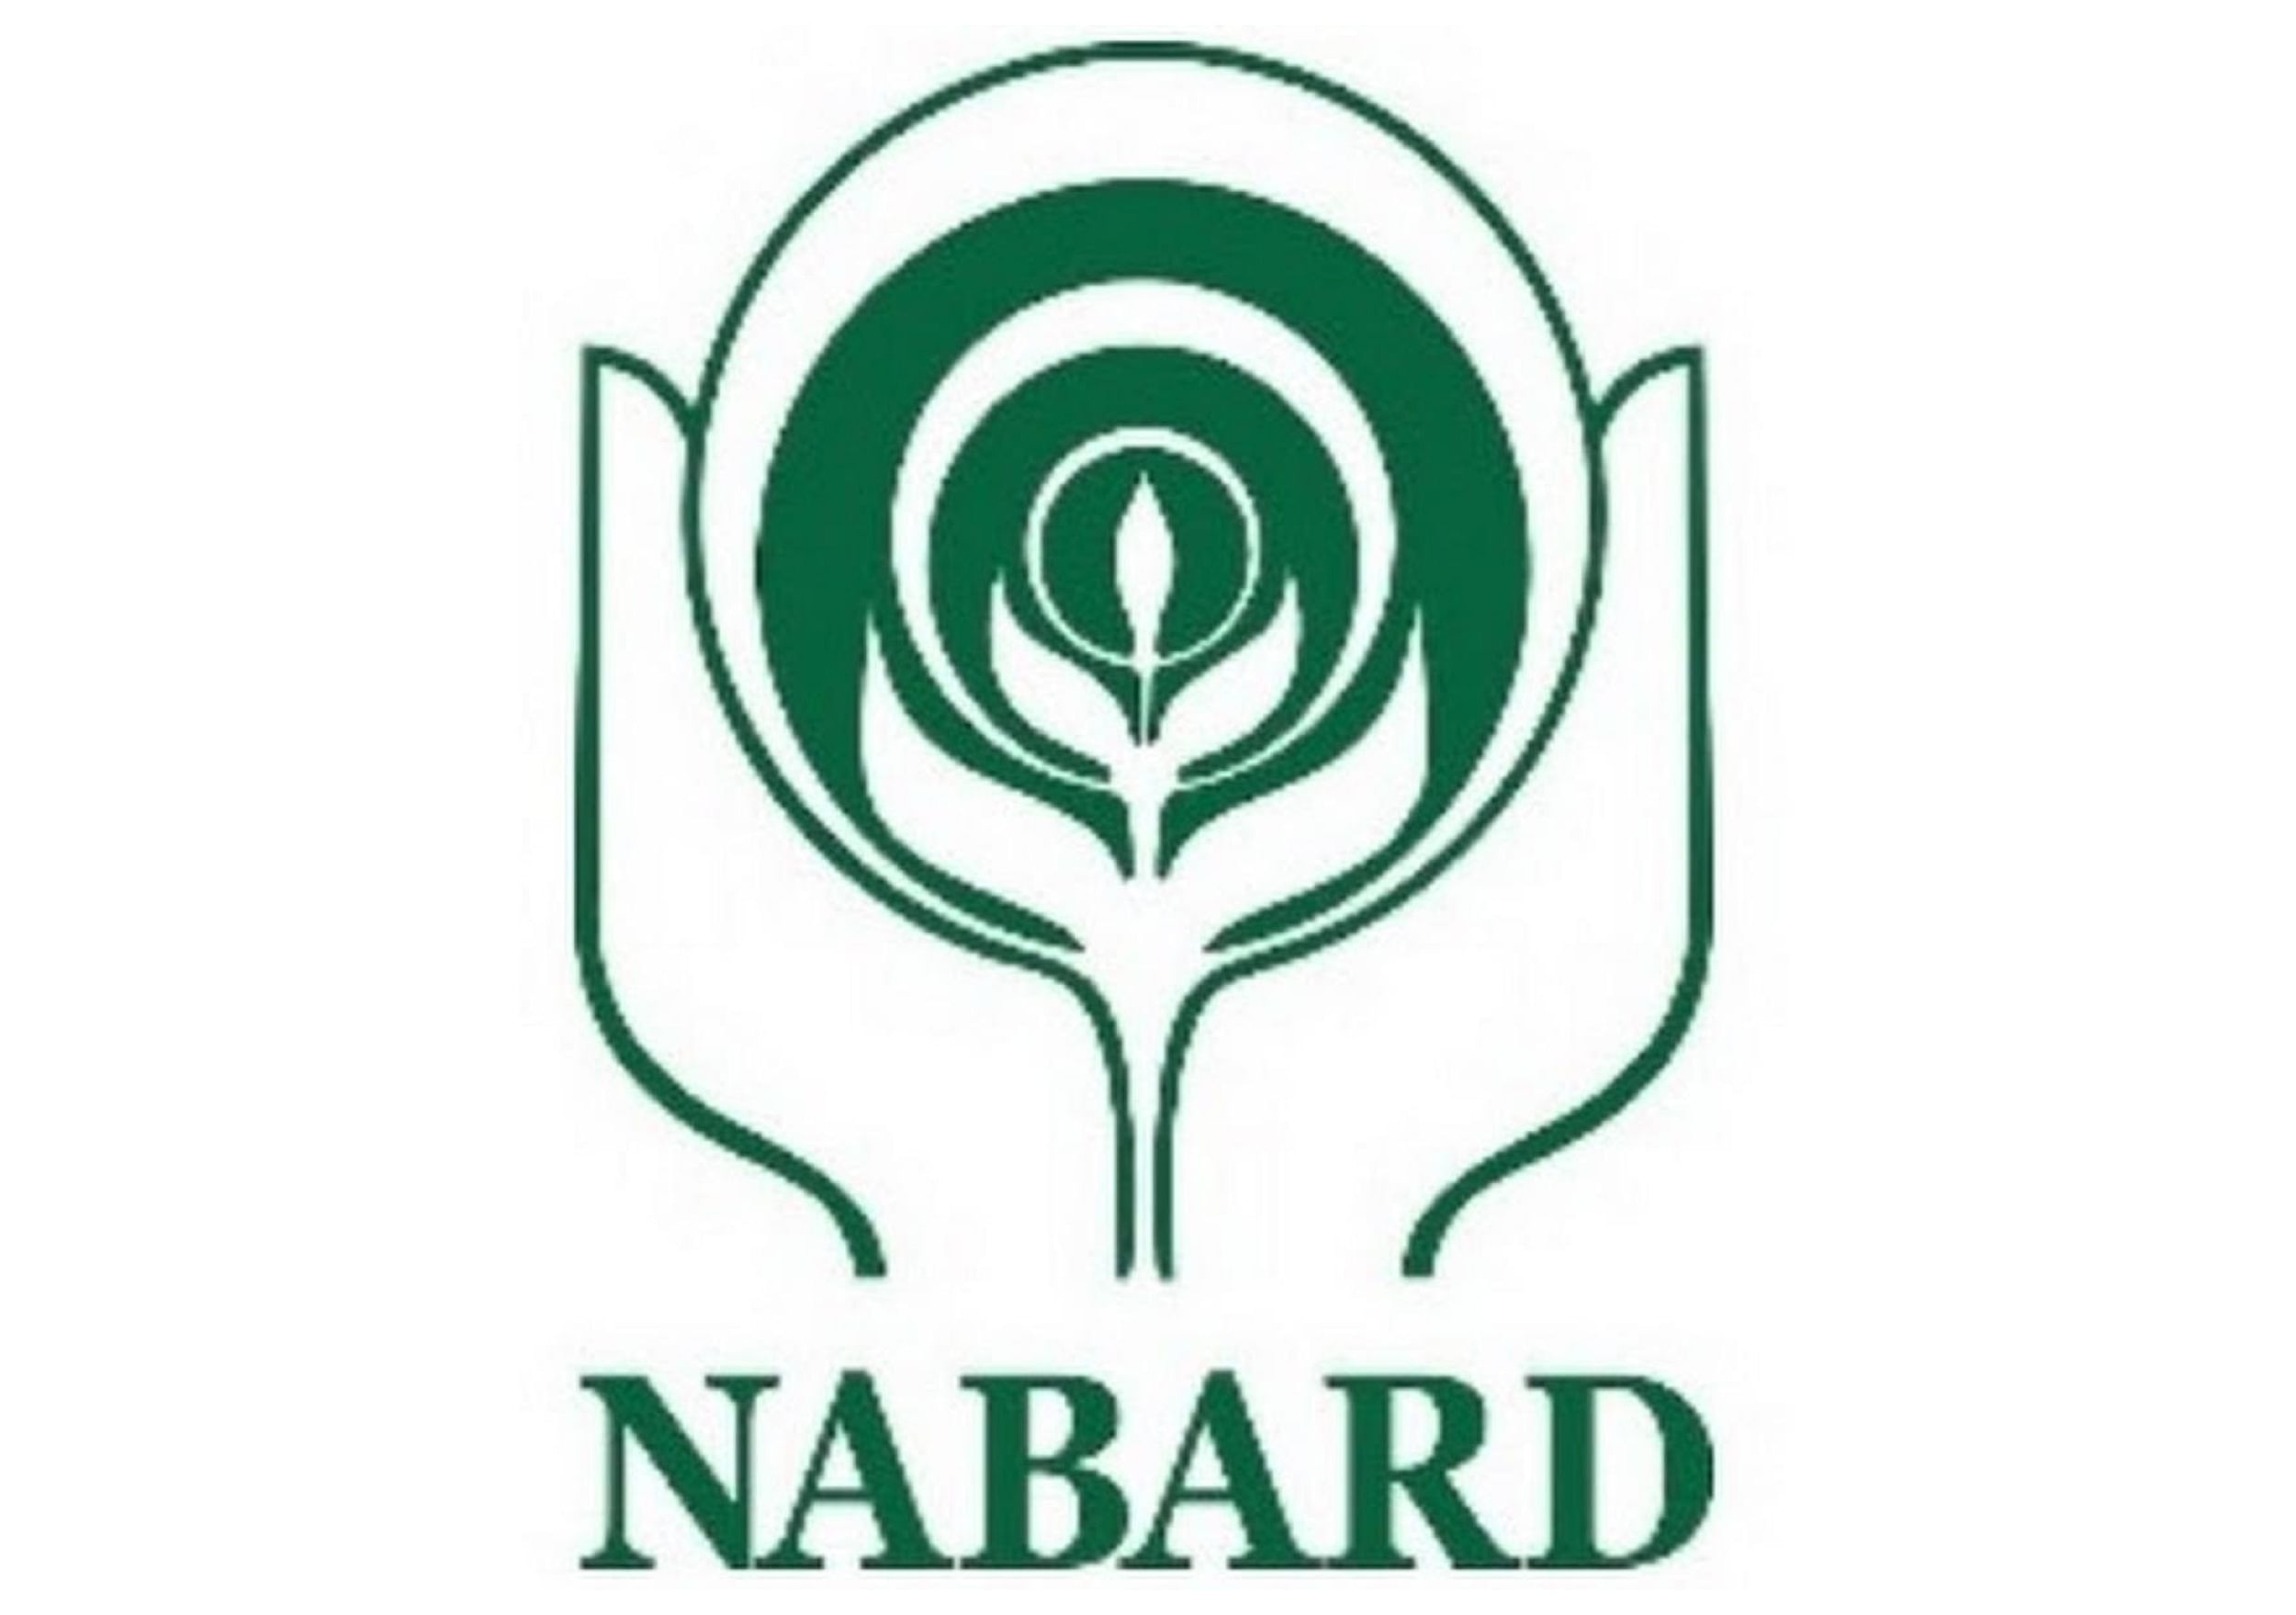 The National Bank for Agriculture and Rural Development (Nabard) raises funds through long term bonds, usually of 10-15 years tenures. (File Image)